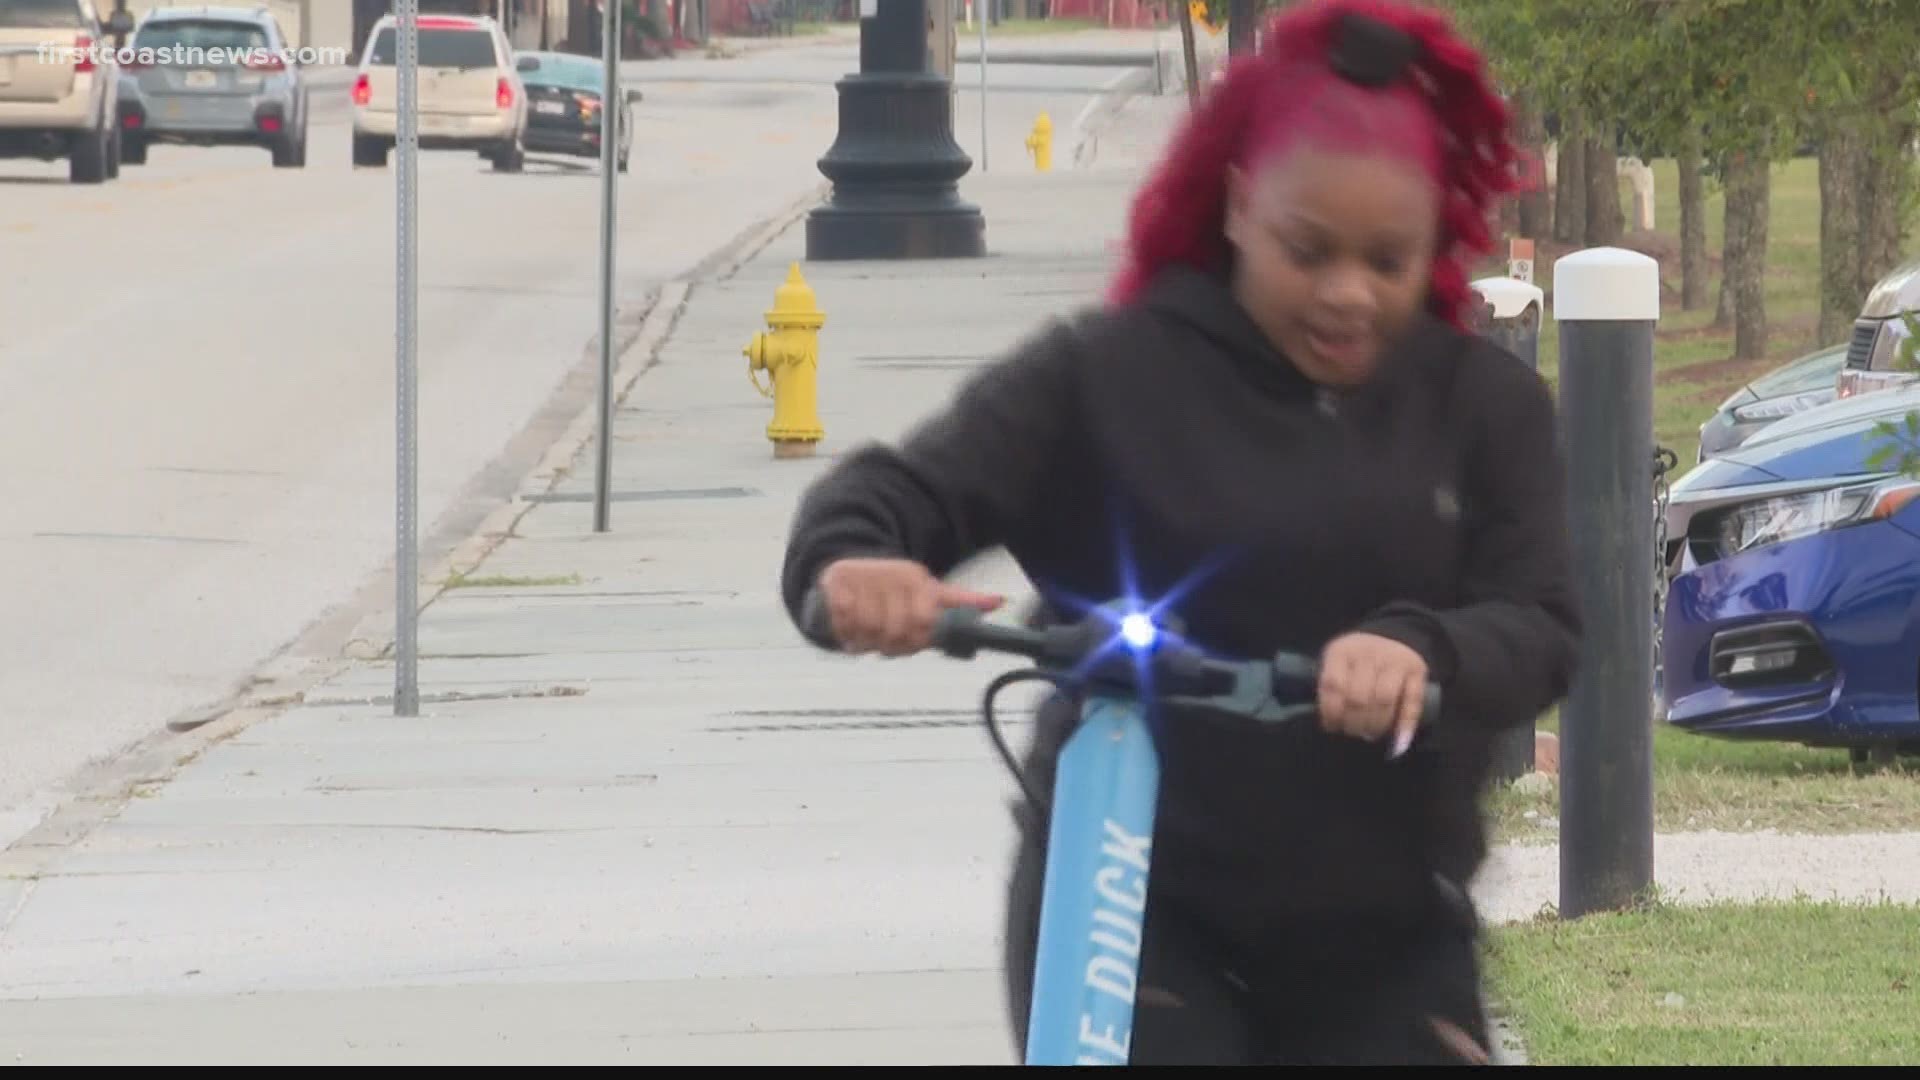 The Jacksonville Sheriff's Office says a rider was hit earlier this month. The city approved four companies to place 400 scooters downtown.